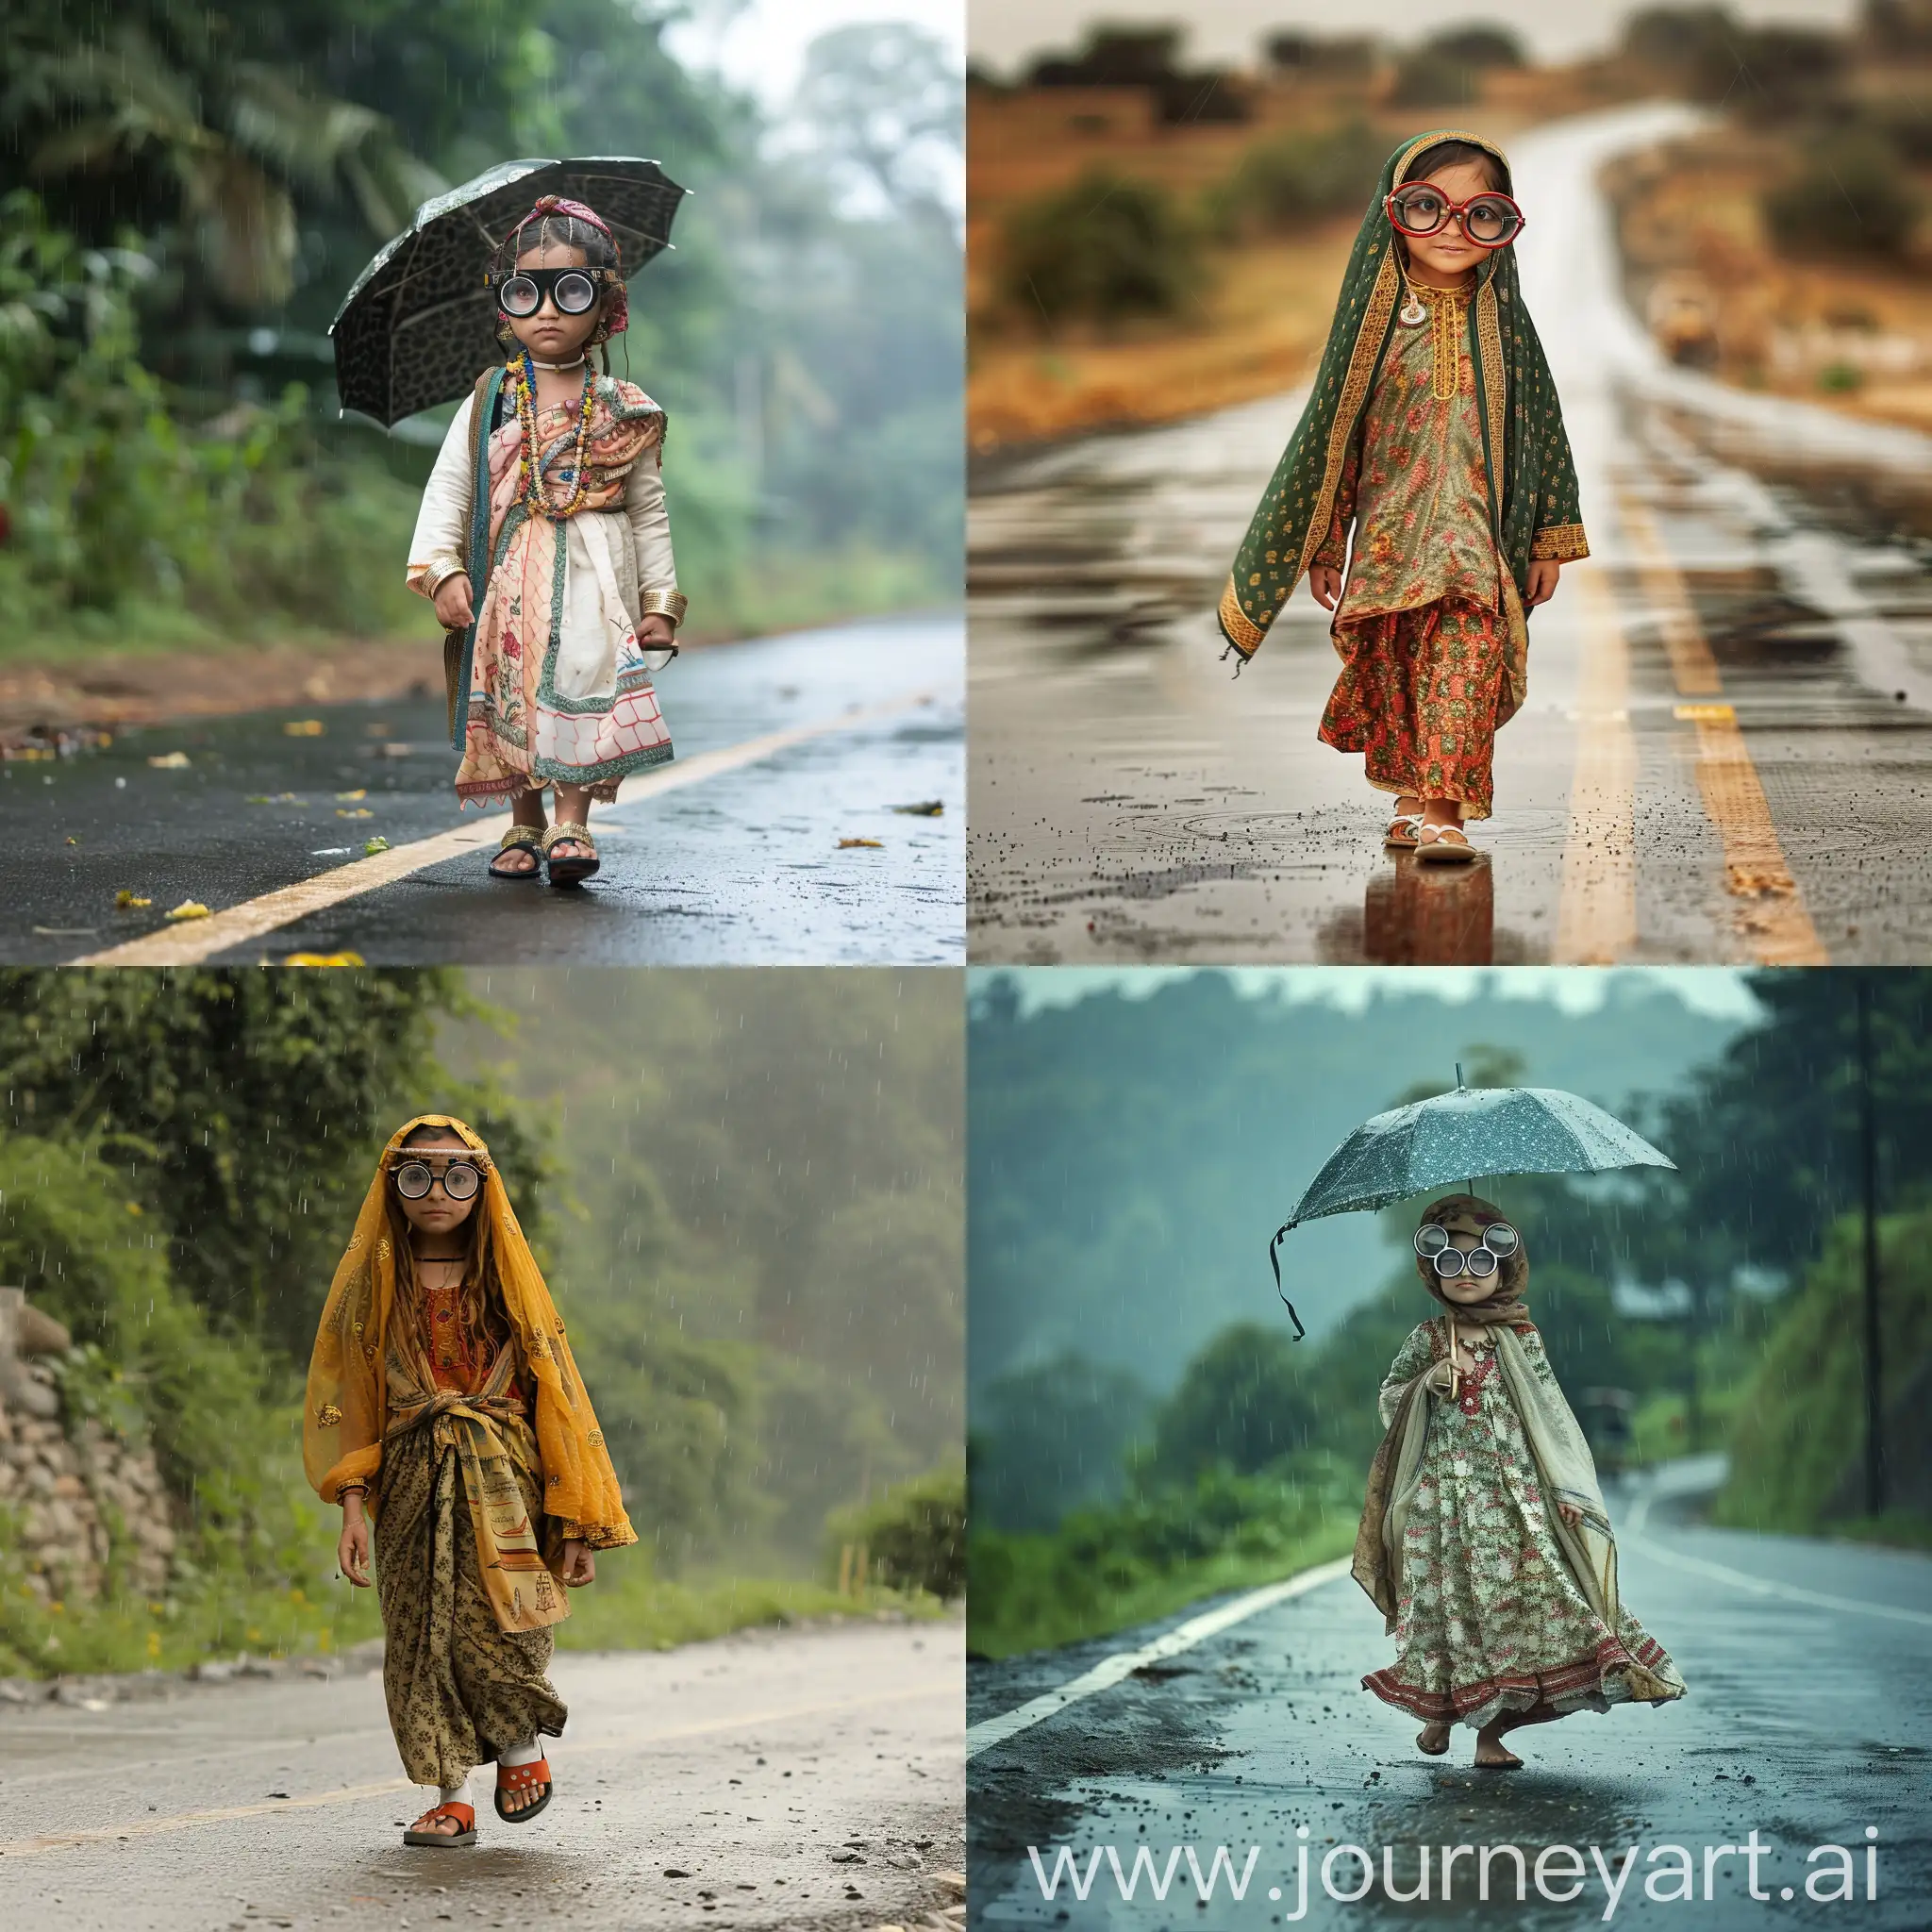 girl walking down the road with big specs and wearing traditional clothes in rain without an umbrella